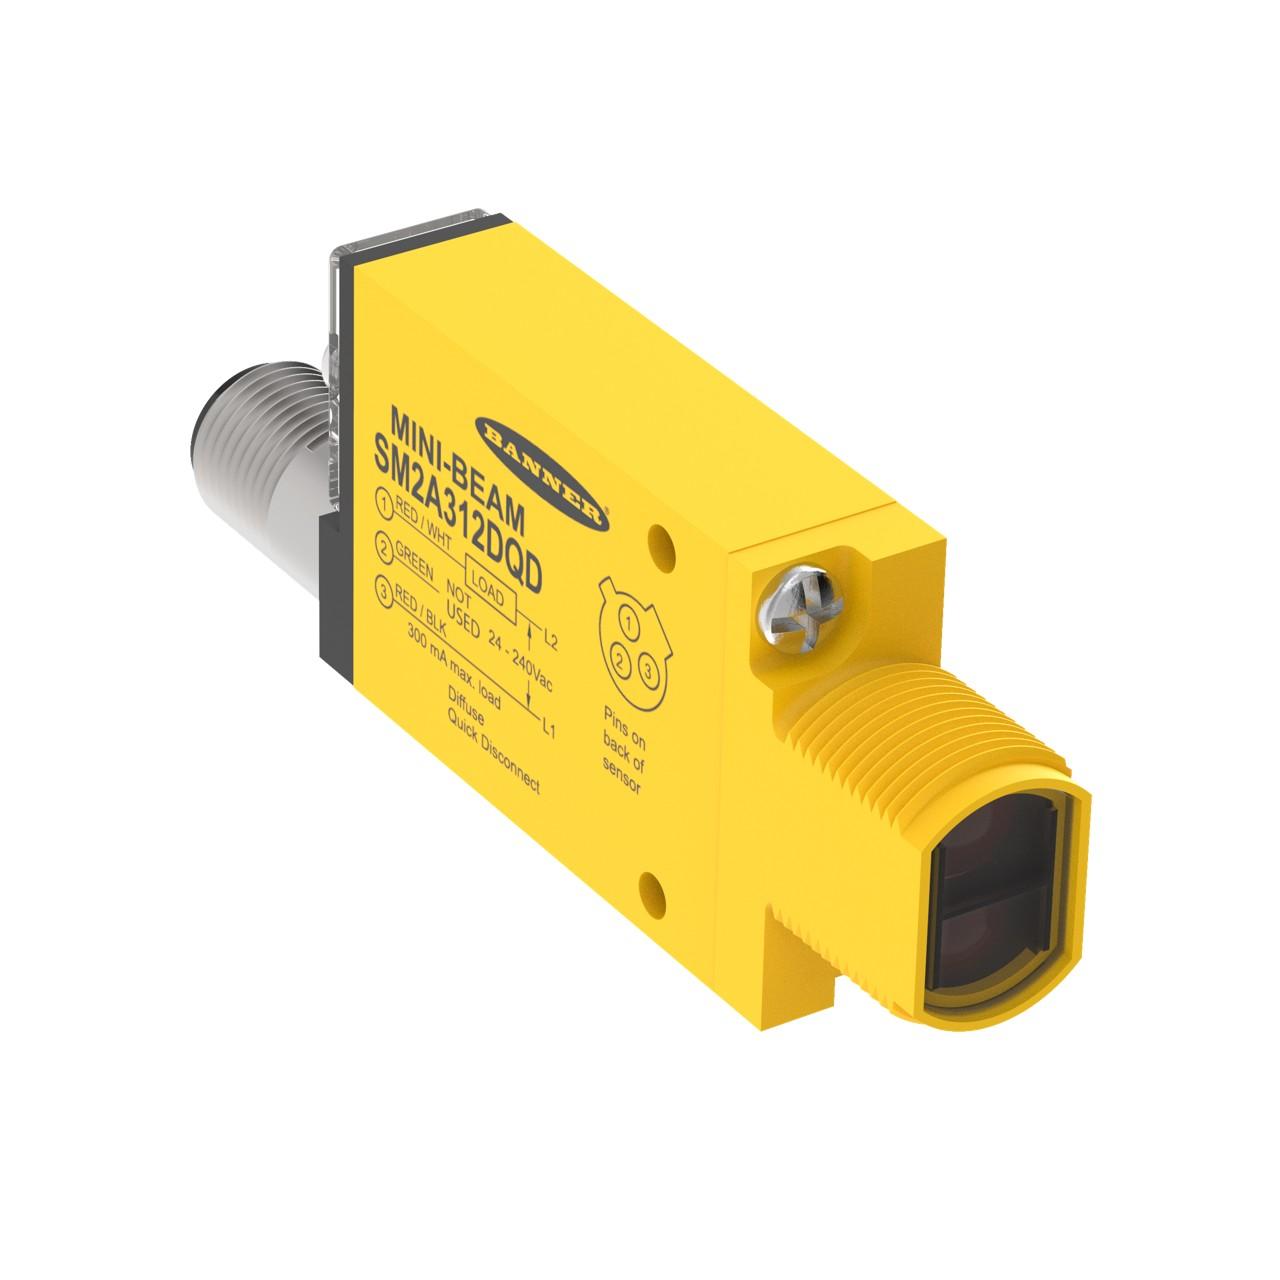 Banner SM2A312DQD MINI-BEAM: Diffuse, Range: 380 mm; Input: 24-240 V ac, Output: SPST Solid-state 2-Wire, Micro 3-pin Integral QD